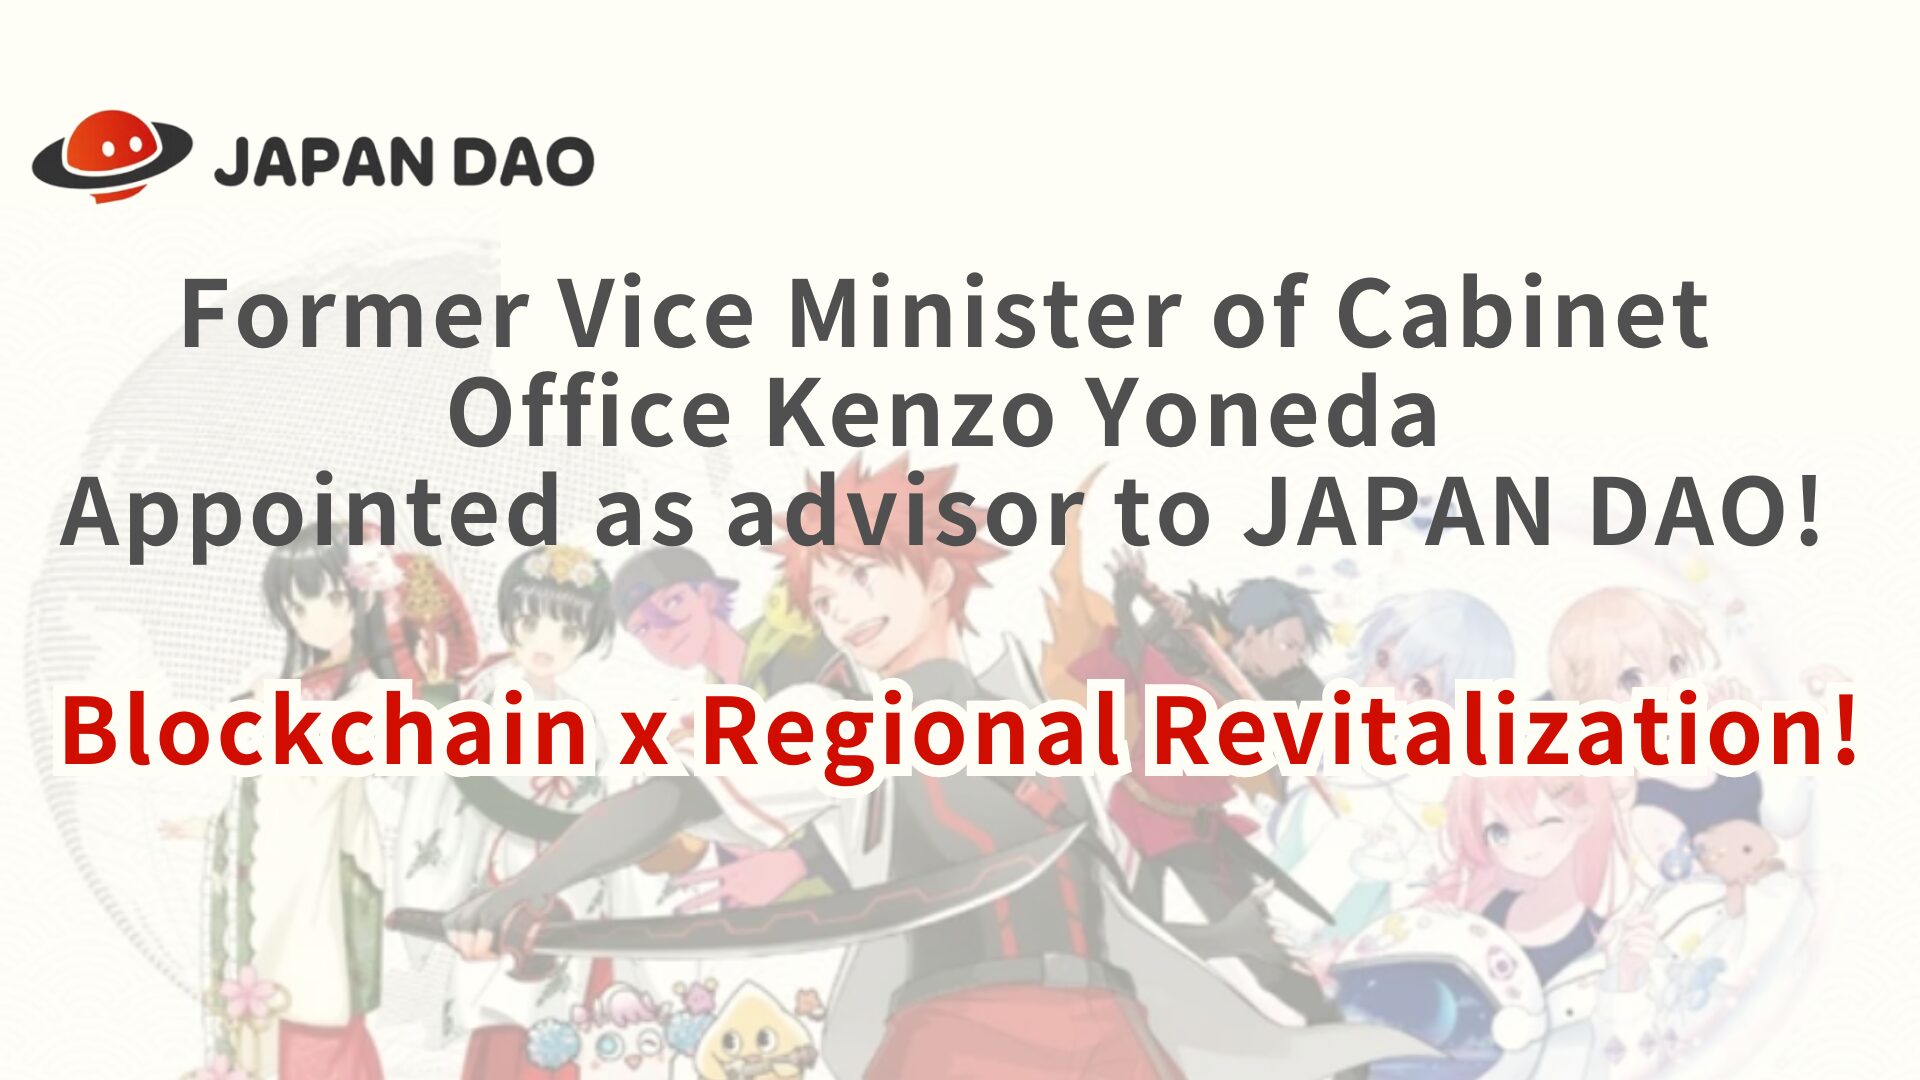 Former Vice Minister of Cabinet Office Kenzo Yoneda Appointed as advisor to JAPAN DAO!